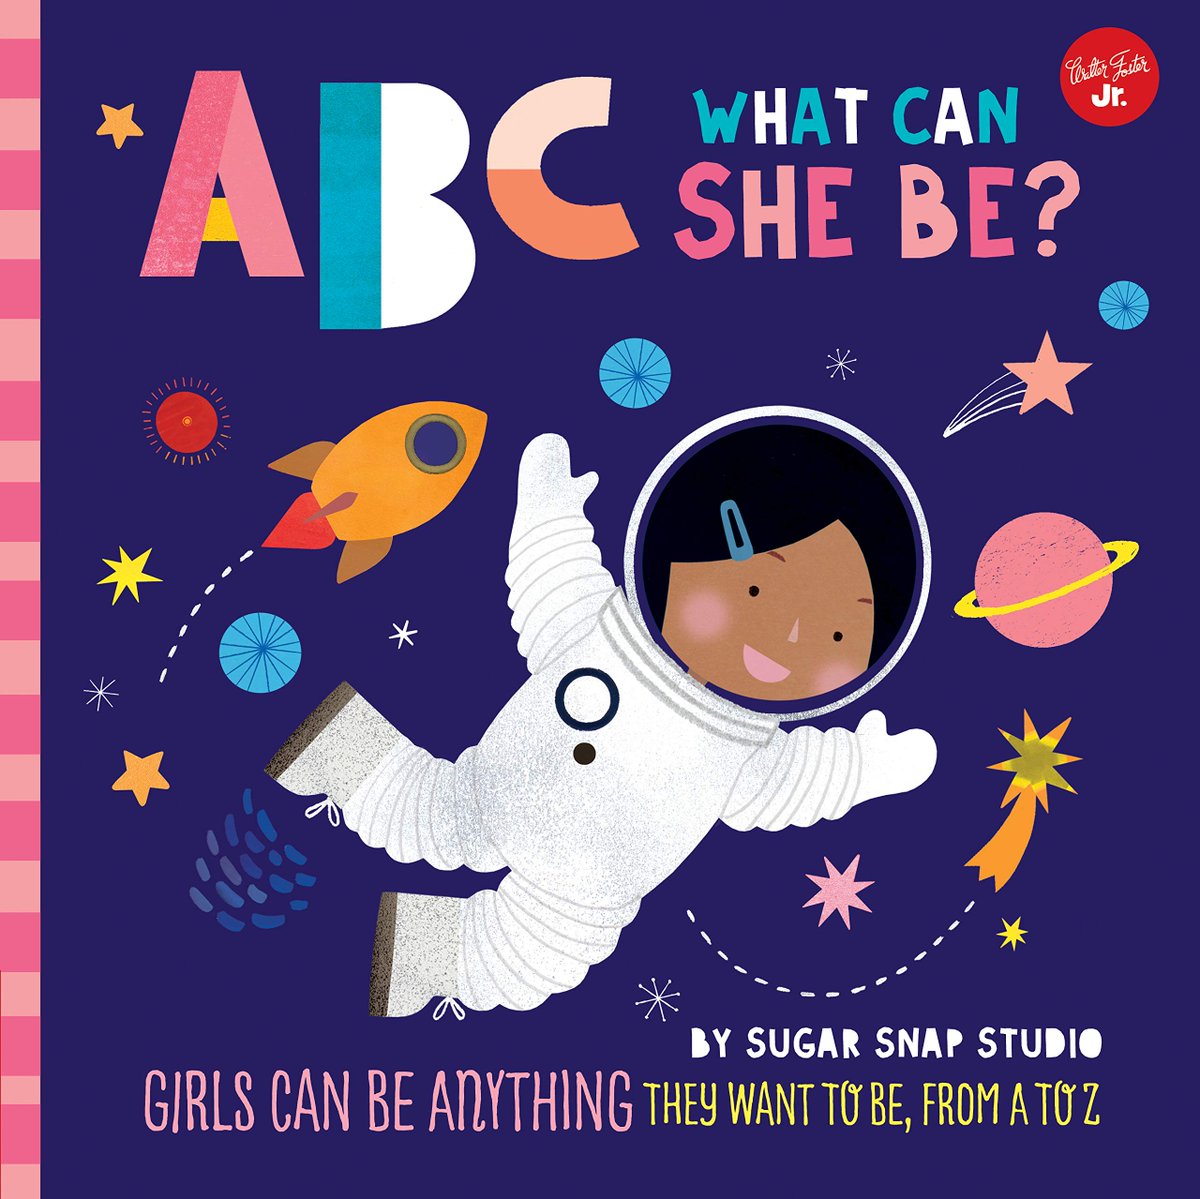 Looking for an alphabet board book that "explores a world of possibilities for little girls with big dreams"? This story by  #WalterFosterJr and  #SugarSnapStudio is suitable for all children who want to see themselves and know there is no limit to who they can become.